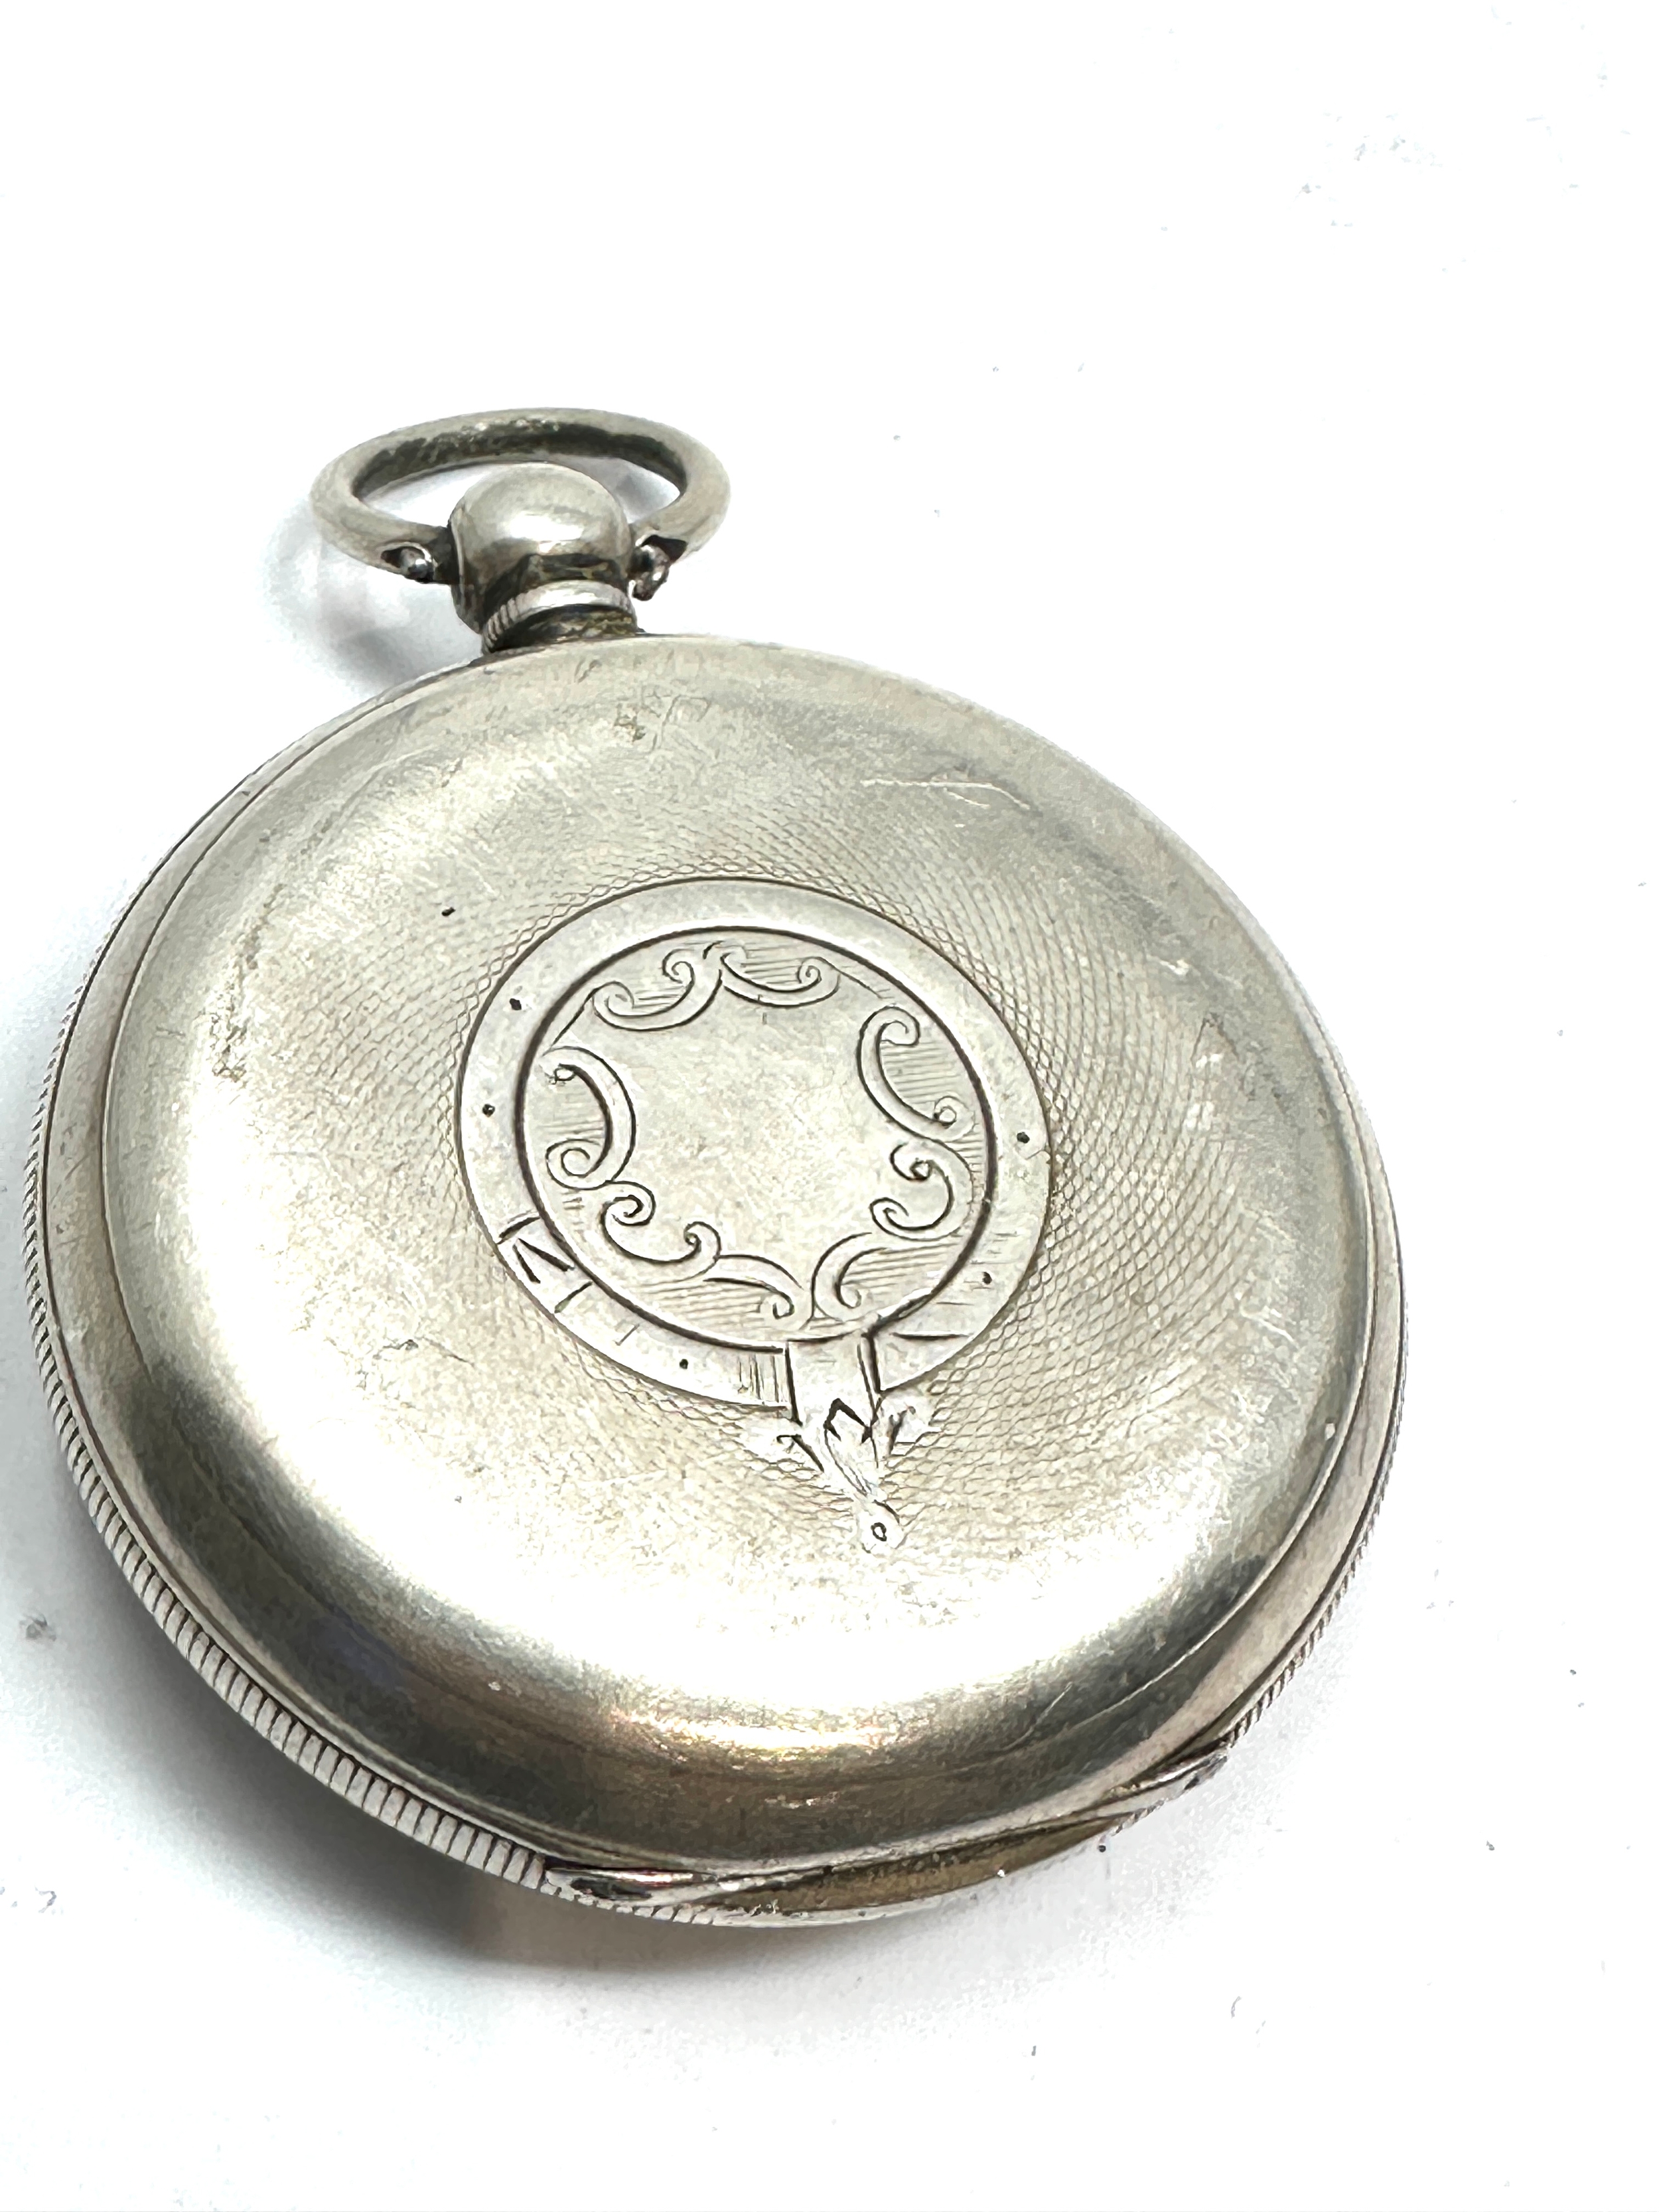 Large antique open face silver pocket watch r.Eprile Edinburgh the watch will tick when shaken but - Image 2 of 5